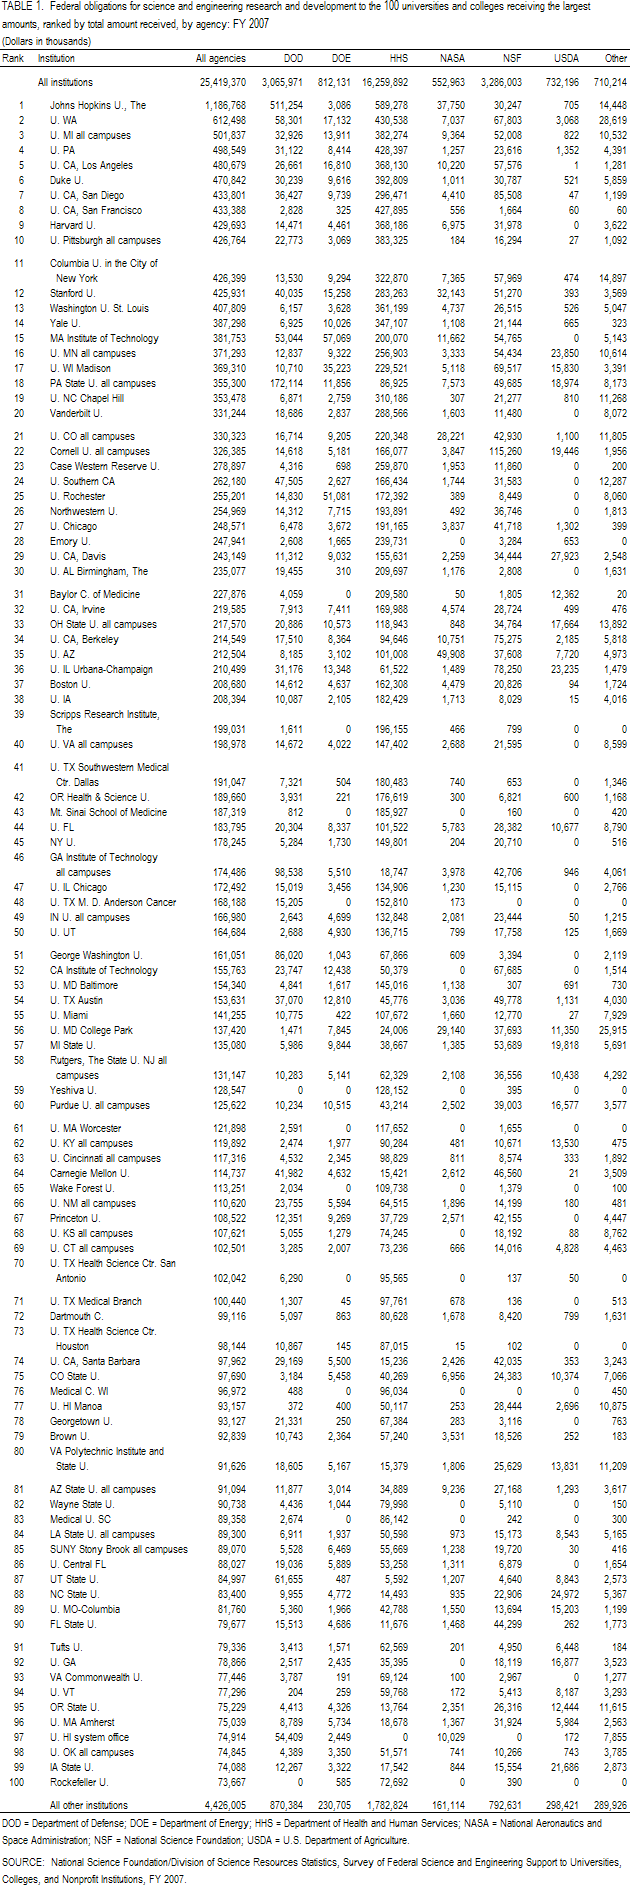 TABLE 1. Federal obligations for science and engineering research and development to the 100 universities and colleges receiving the largest amounts, ranked by total amount received, by agency: FY 2007.